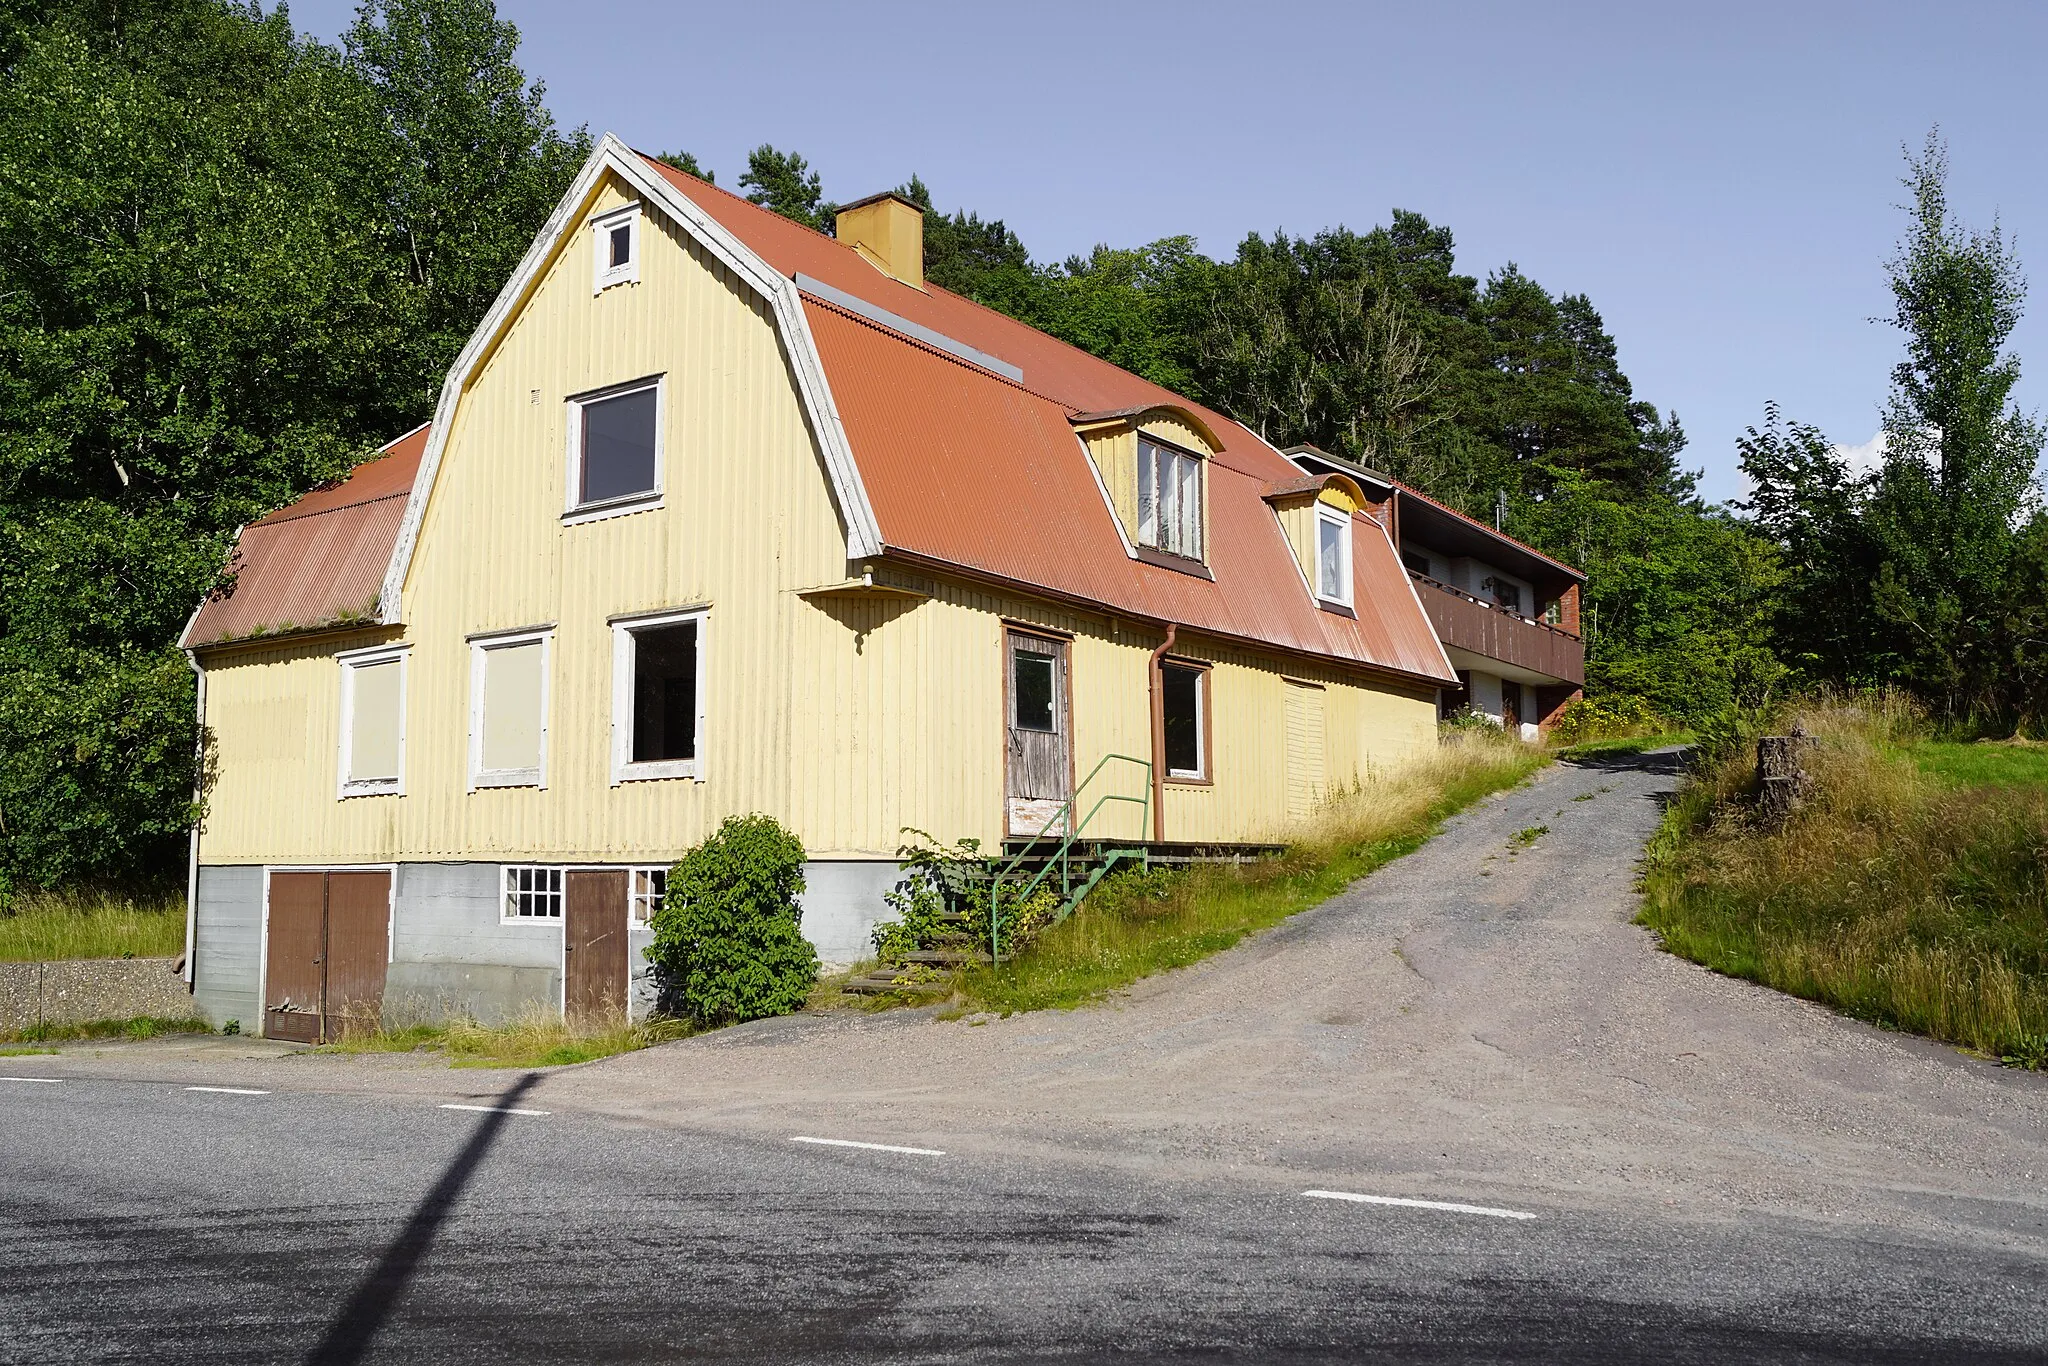 Photo showing: The former general store in Blinneberg, Ale Municipality, Sweden